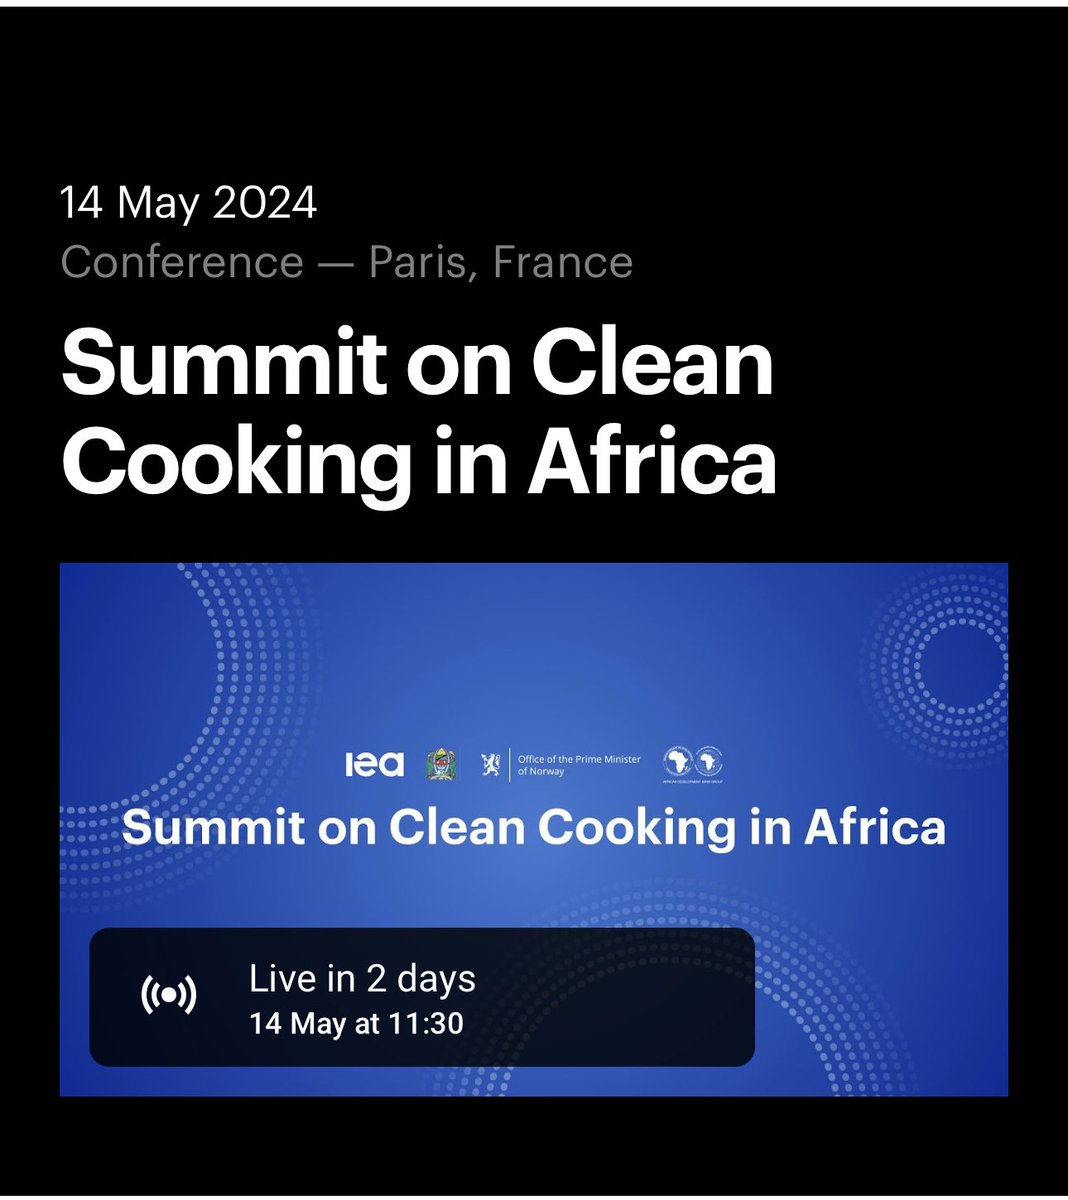 Now recognized as a global champion on Clean Cooking, H.E. @SuluhuSamia will co-convene and co-Chair Clean Cooking Summit in Africa on 14th May 2024, organized by International Energy Agency (IEA) in Paris, France. Other Co-Chairs are @jonasgahrstore Prime Minister of Norway,